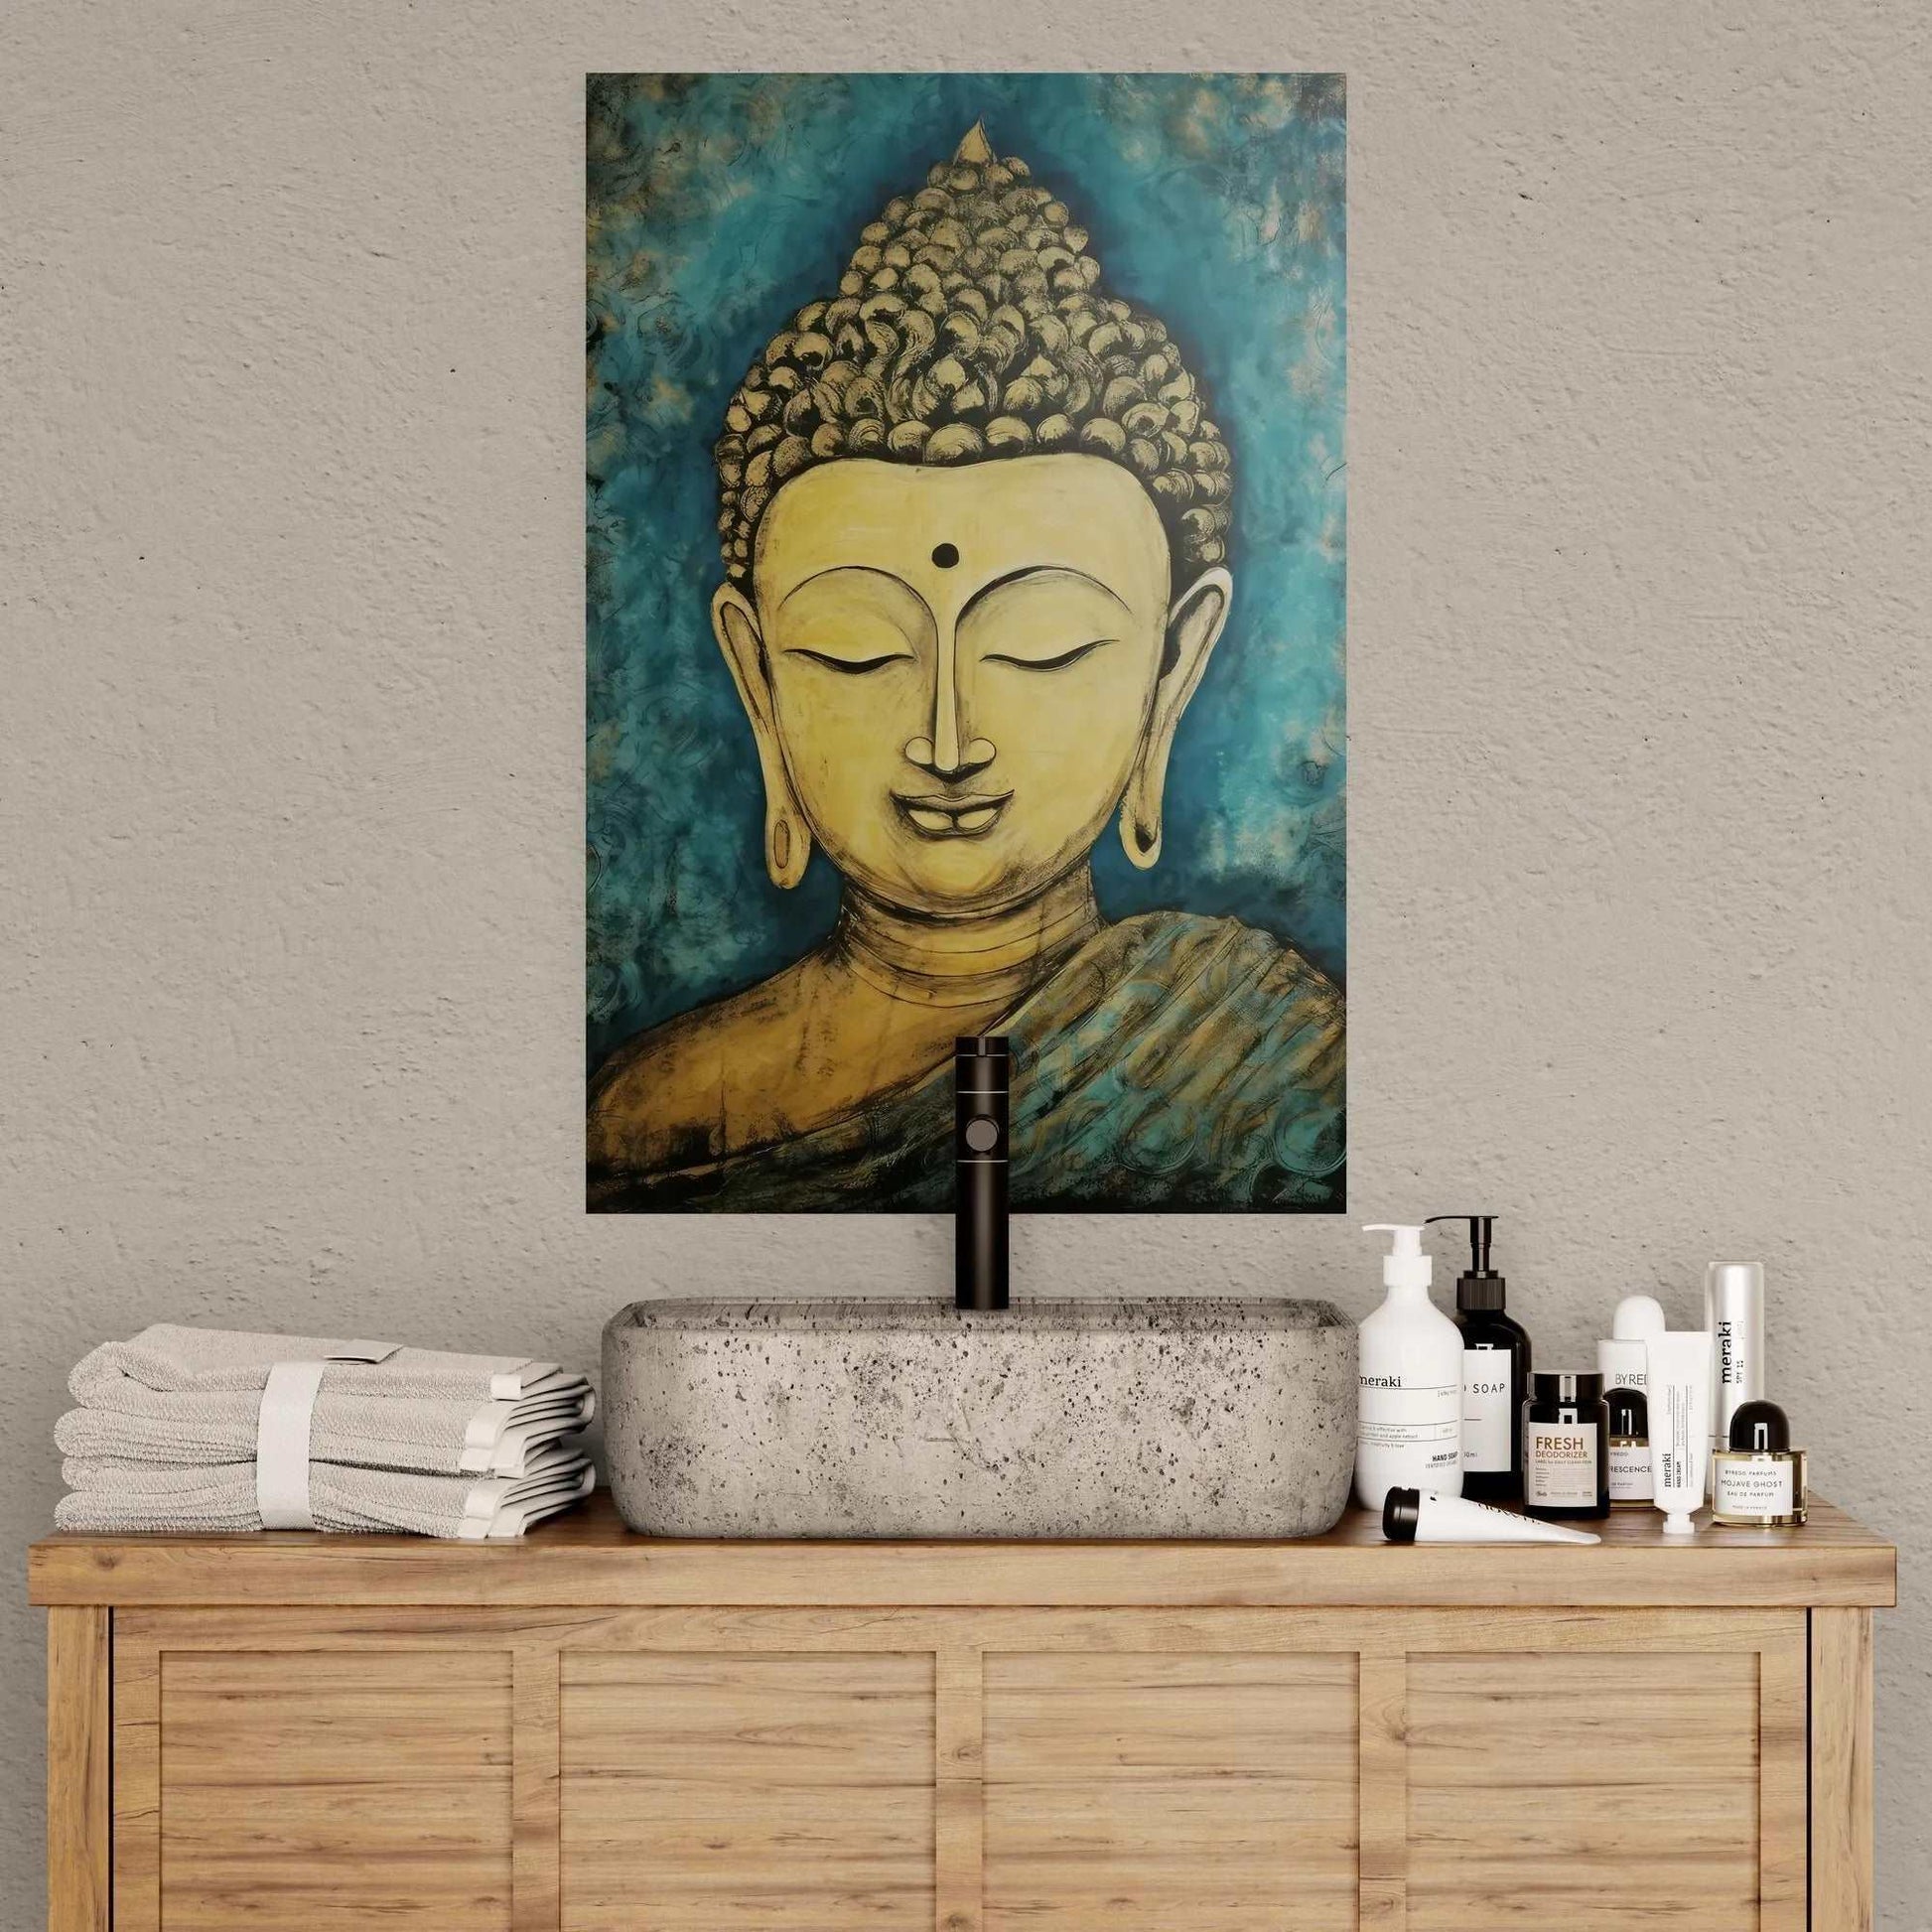 A serene Buddha painting hangs above a modern bathroom vanity with a stone basin and toiletries, creating a tranquil spa atmosphere.